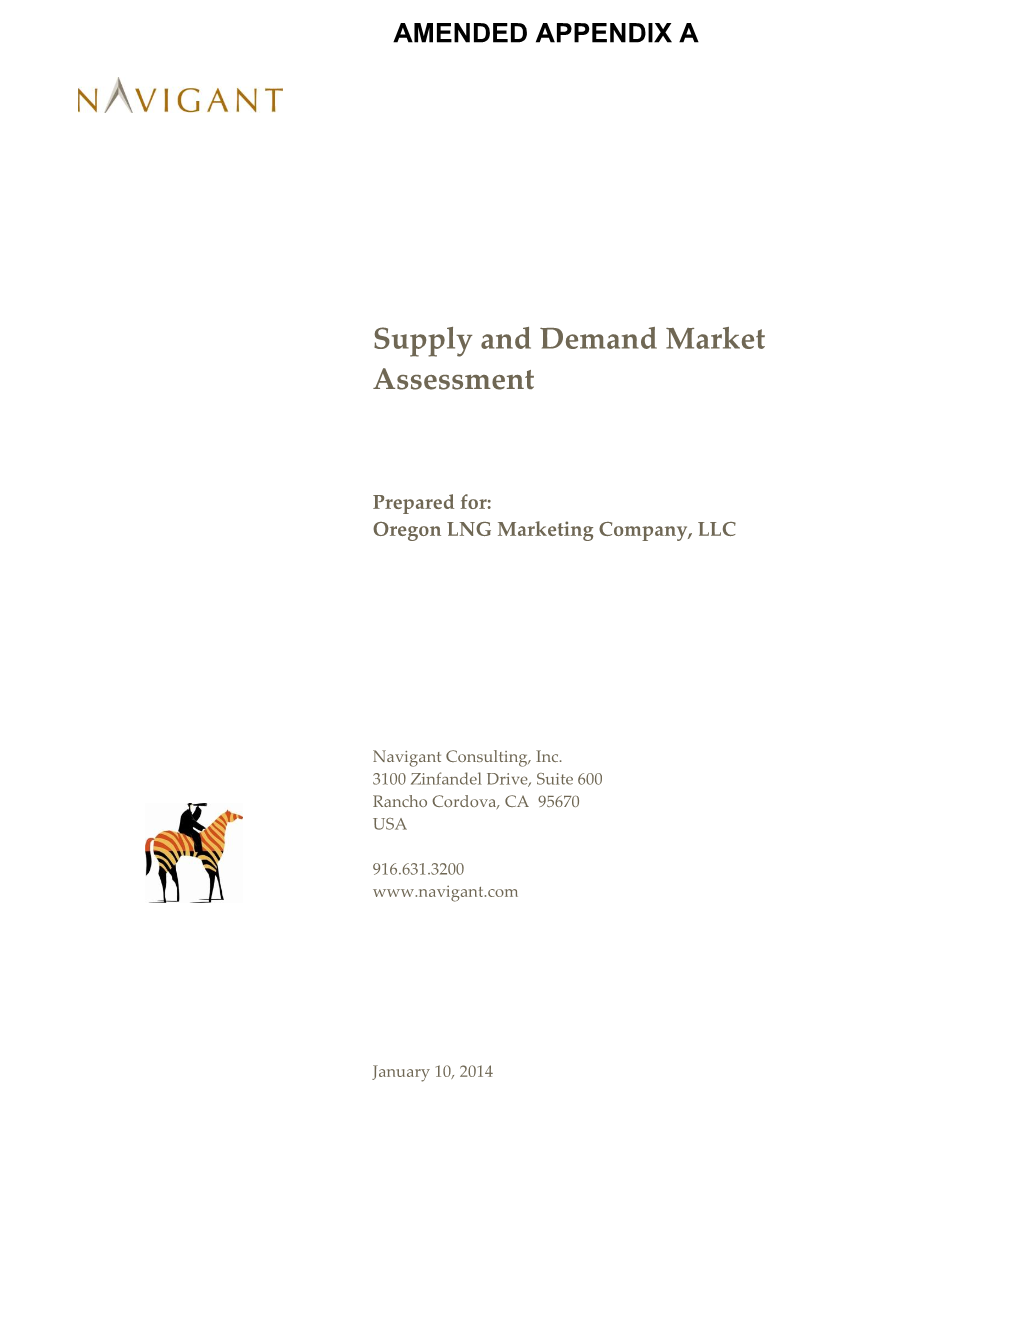 Supply and Demand Market Assessment